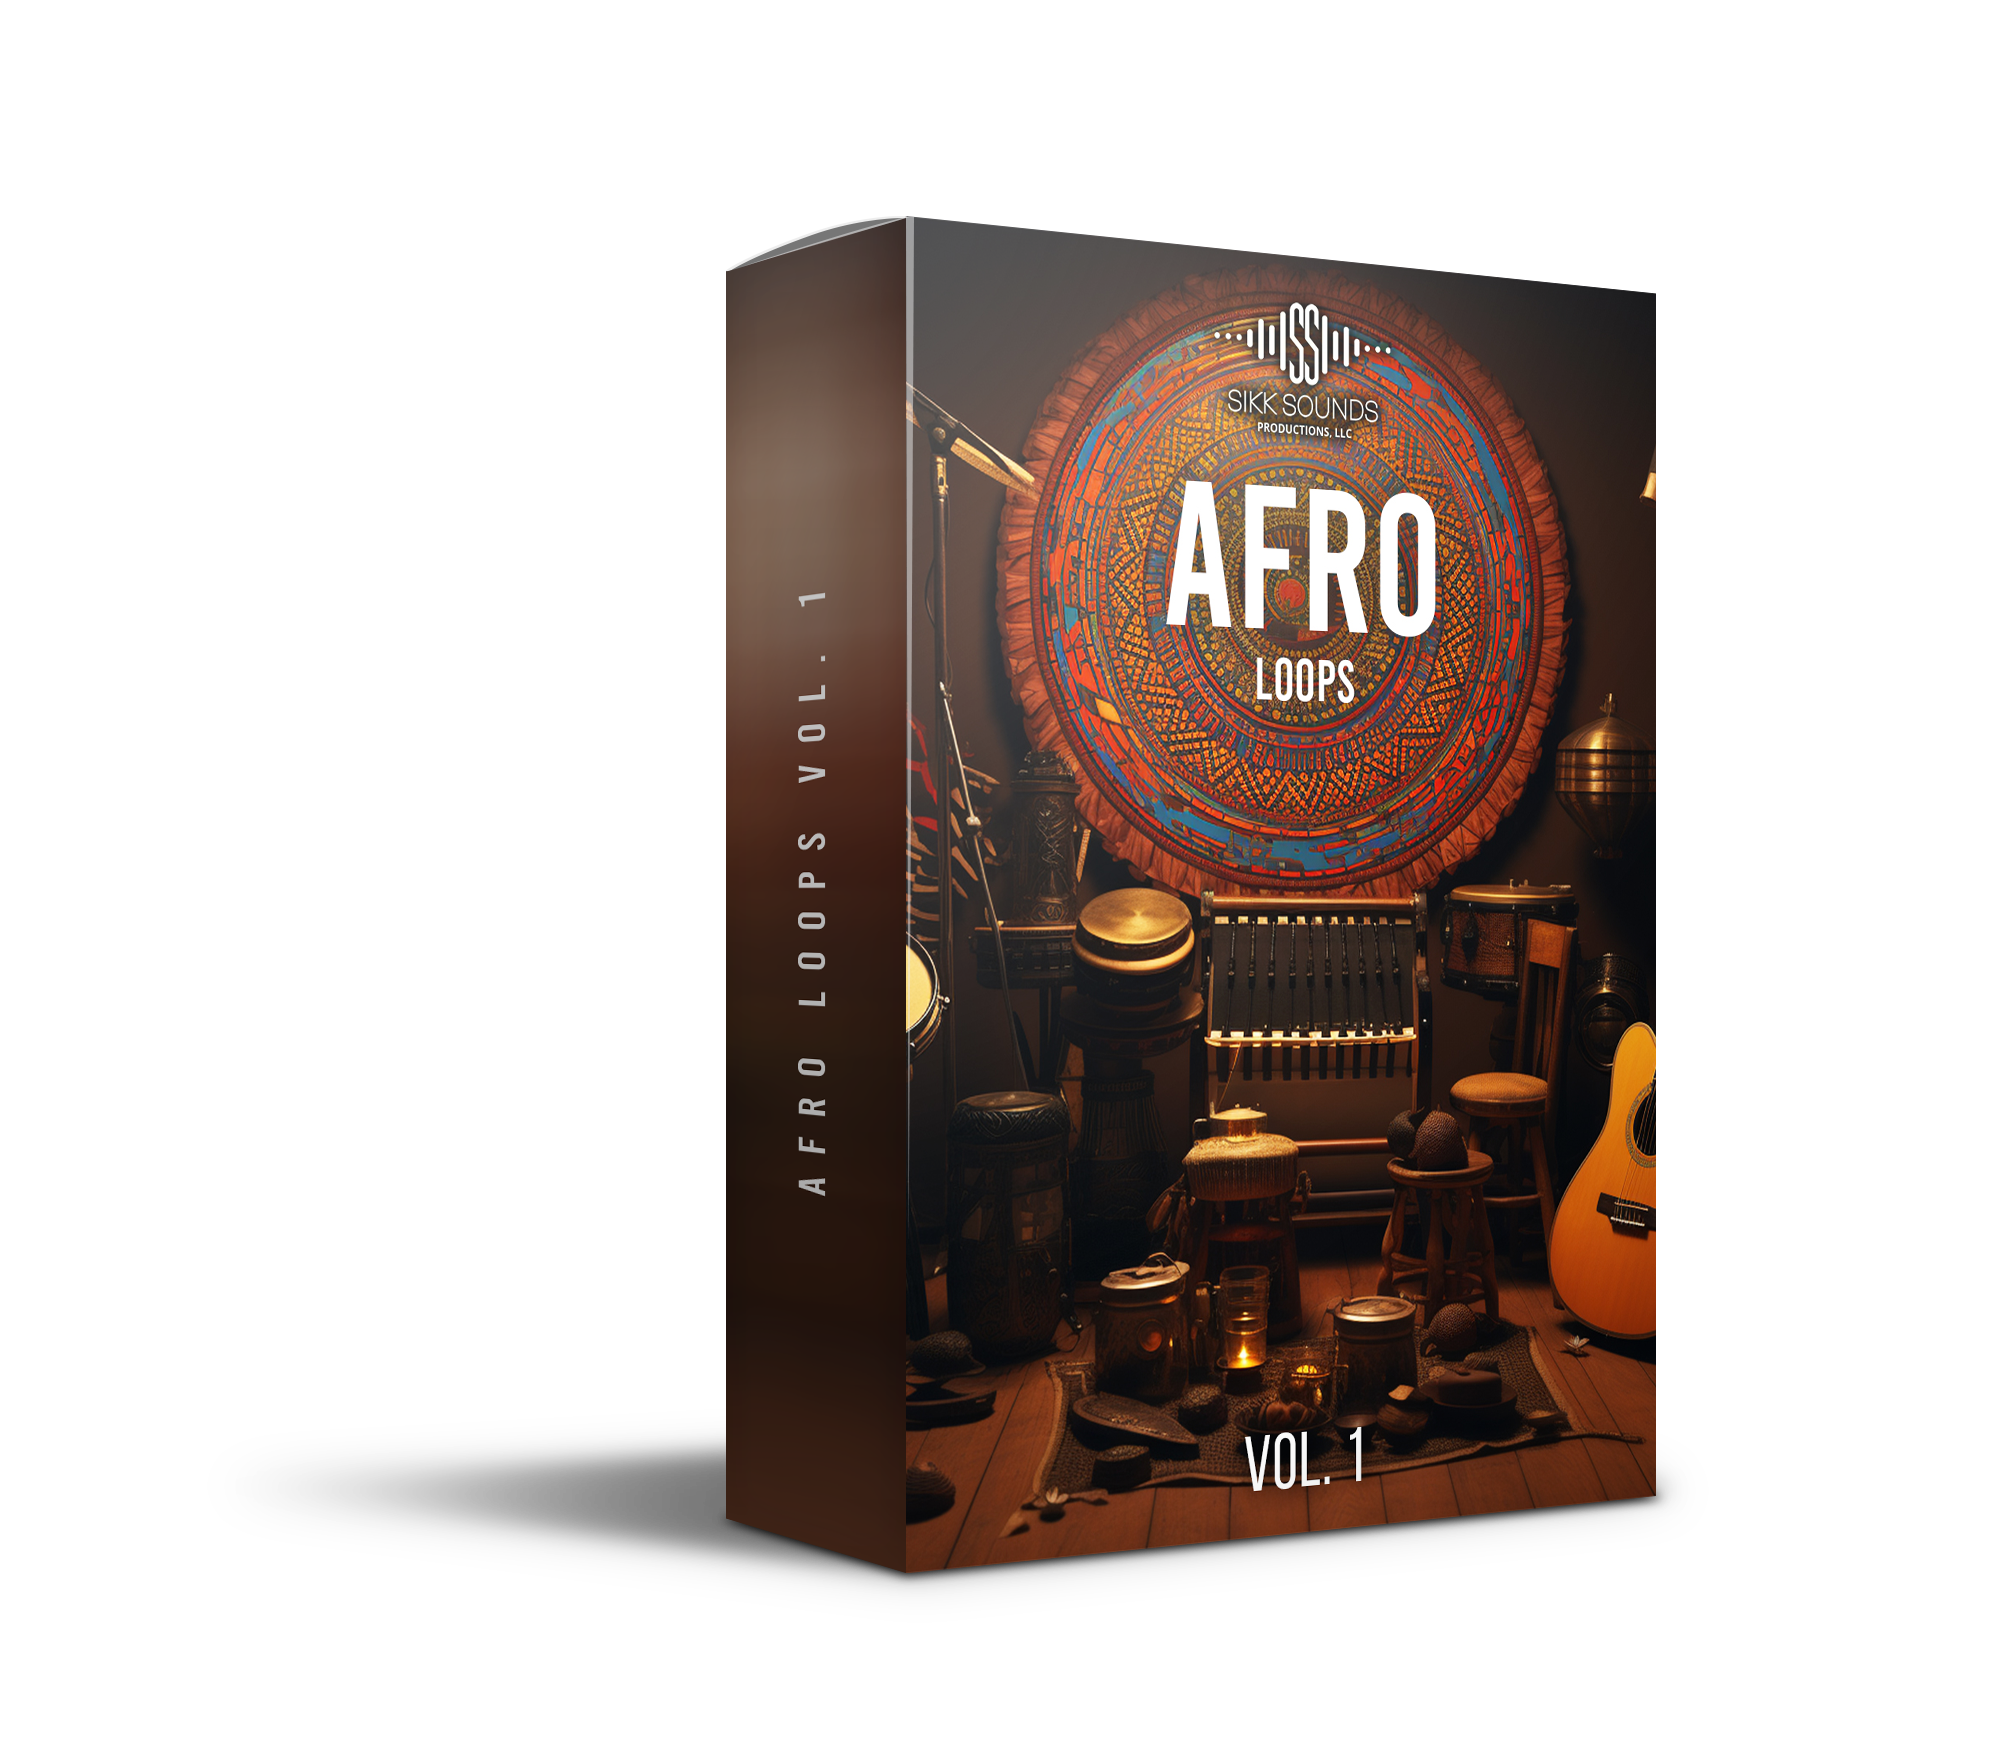 SiKKSounds Afro Loops Vol.1